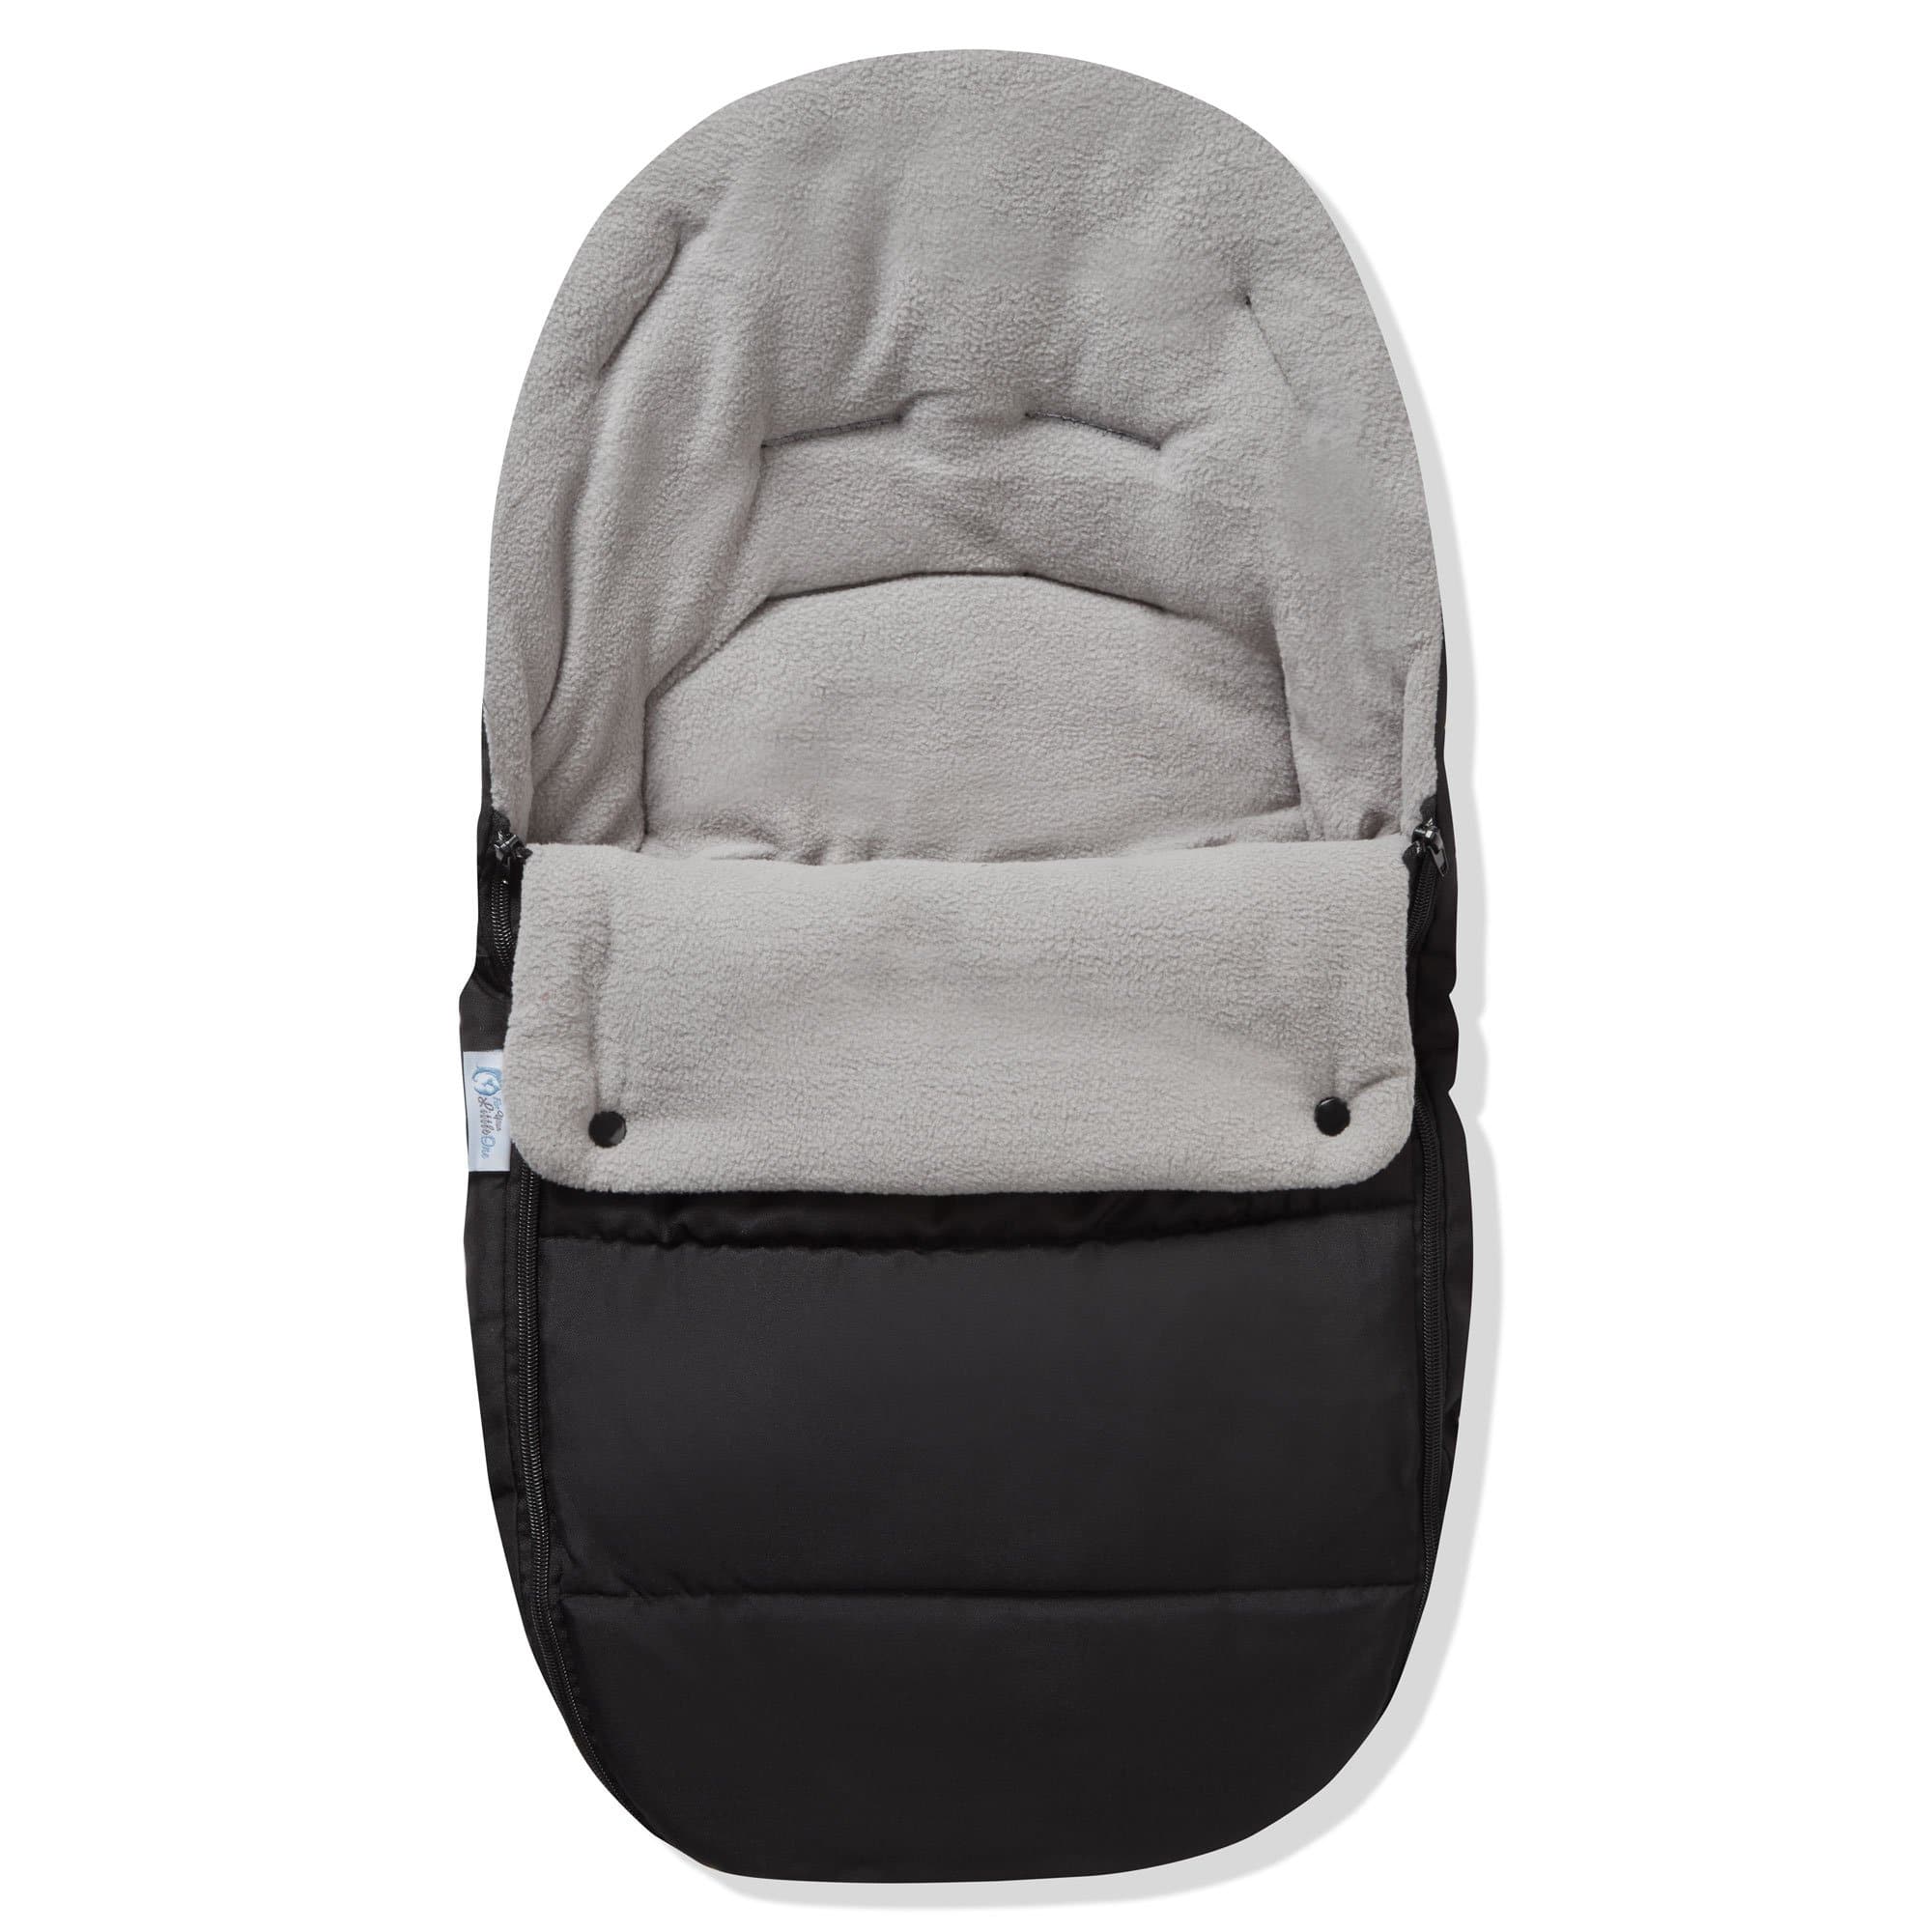 Premium Car Seat Footmuff / Cosy Toes Compatible with Babylo - Dolphin Grey / Fits All Models | For Your Little One